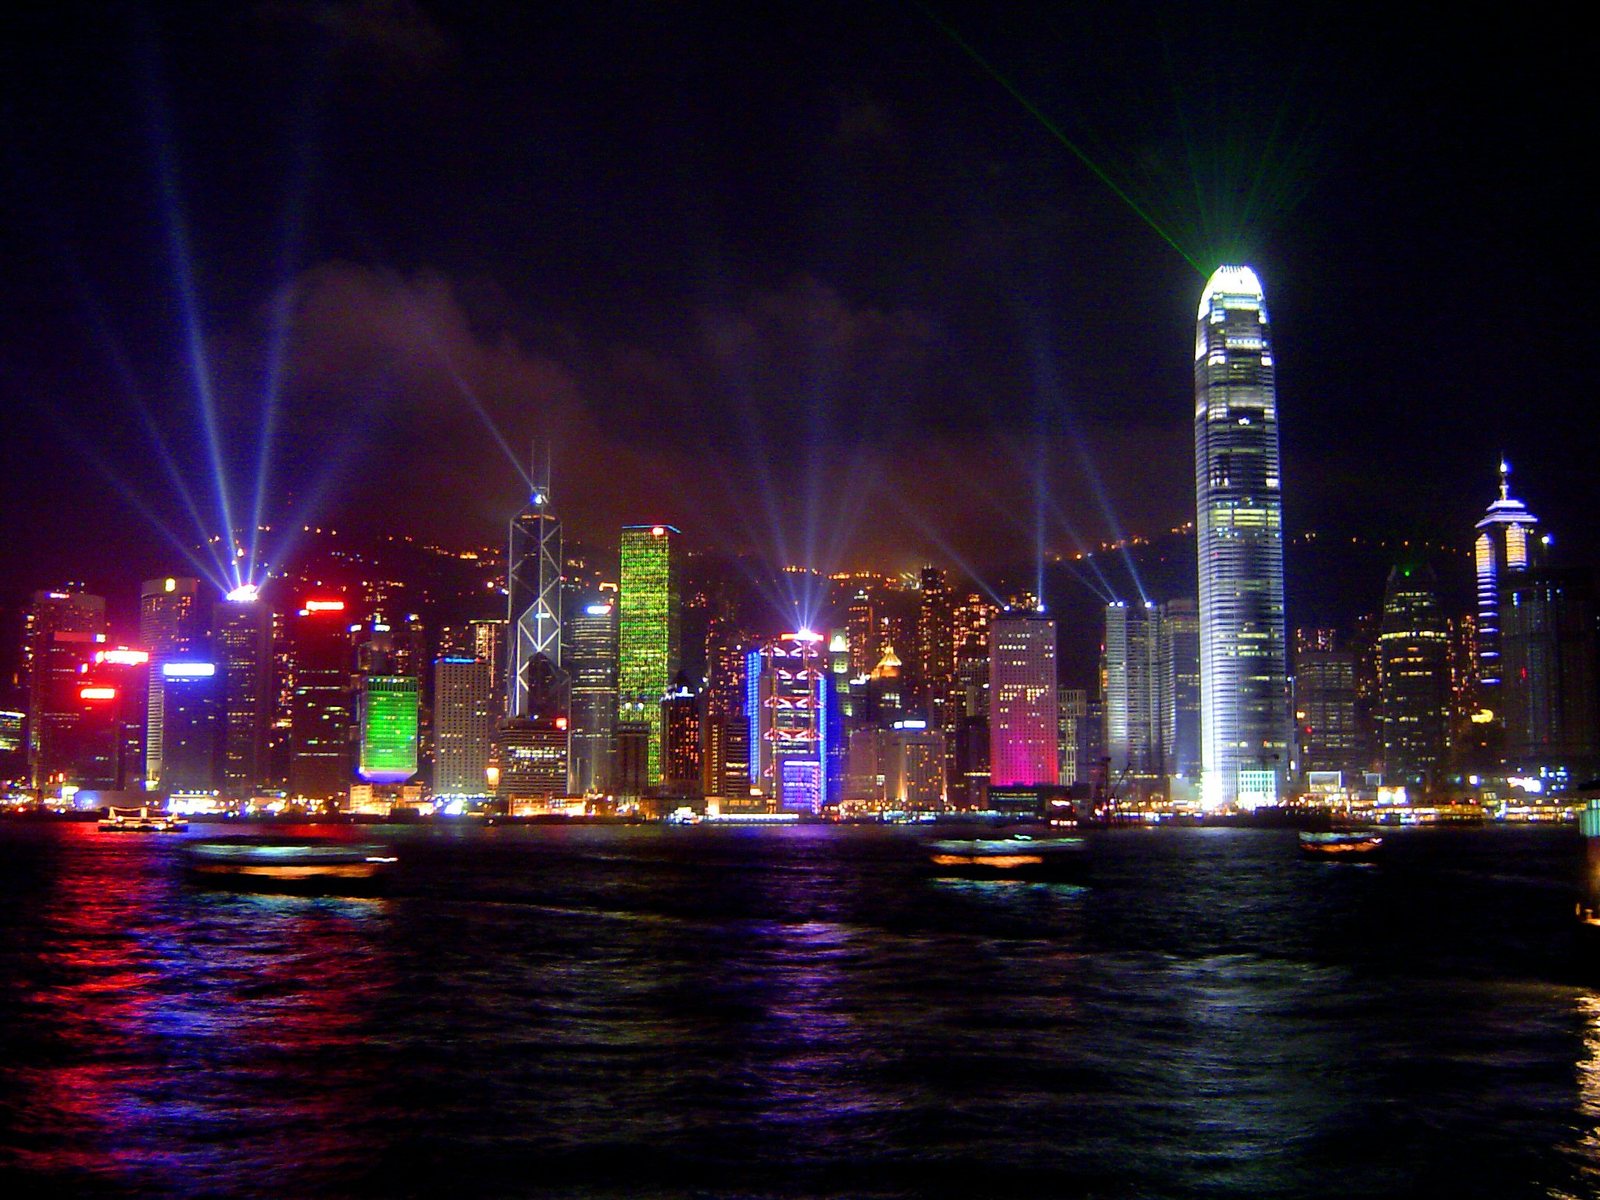 Hong Kong Fund Managers: ESG to be a Key Growth Driver, the “New Normal”